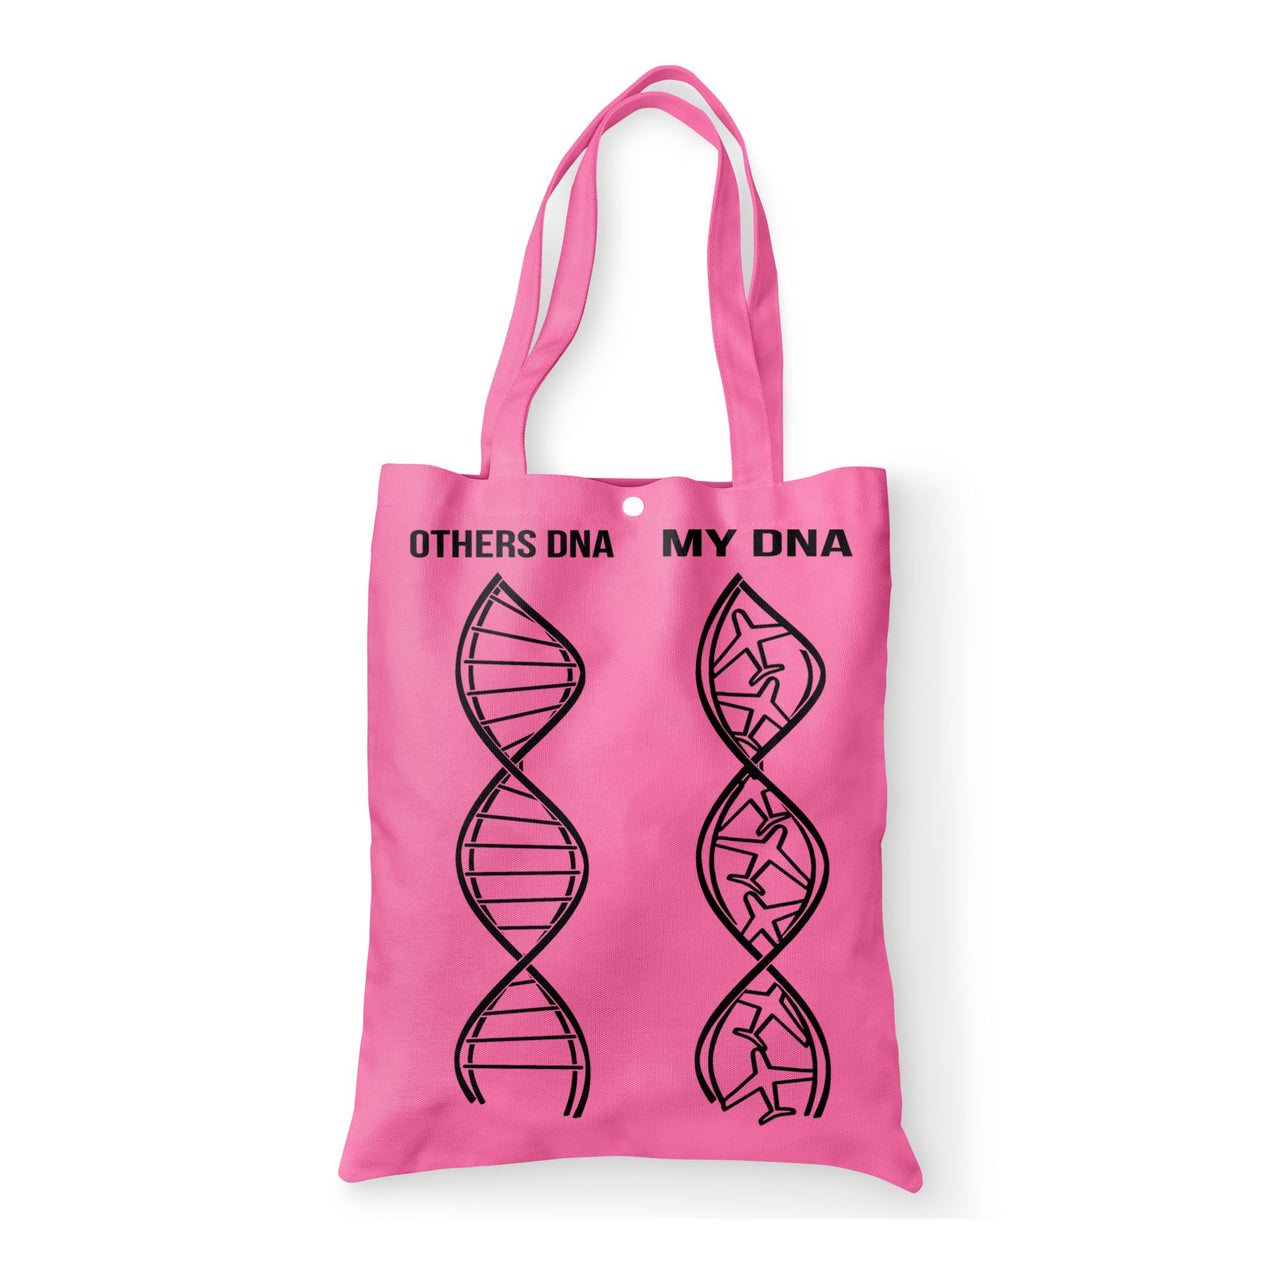 Aviation DNA Designed Tote Bags